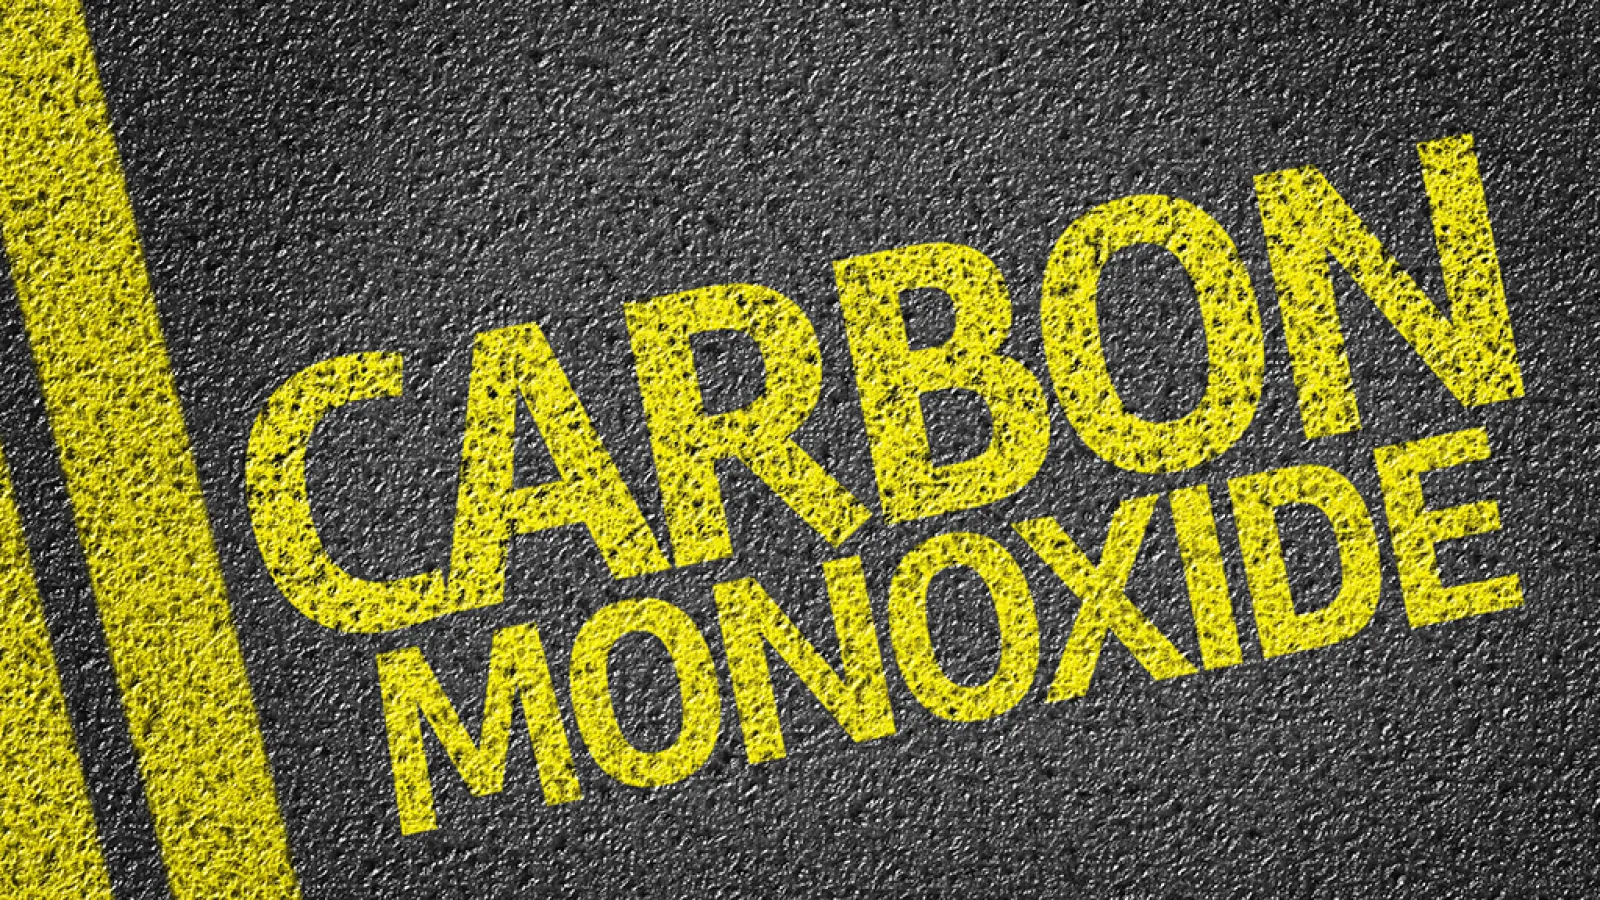 How to Prevent Carbon Monoxide Threats in Your Home